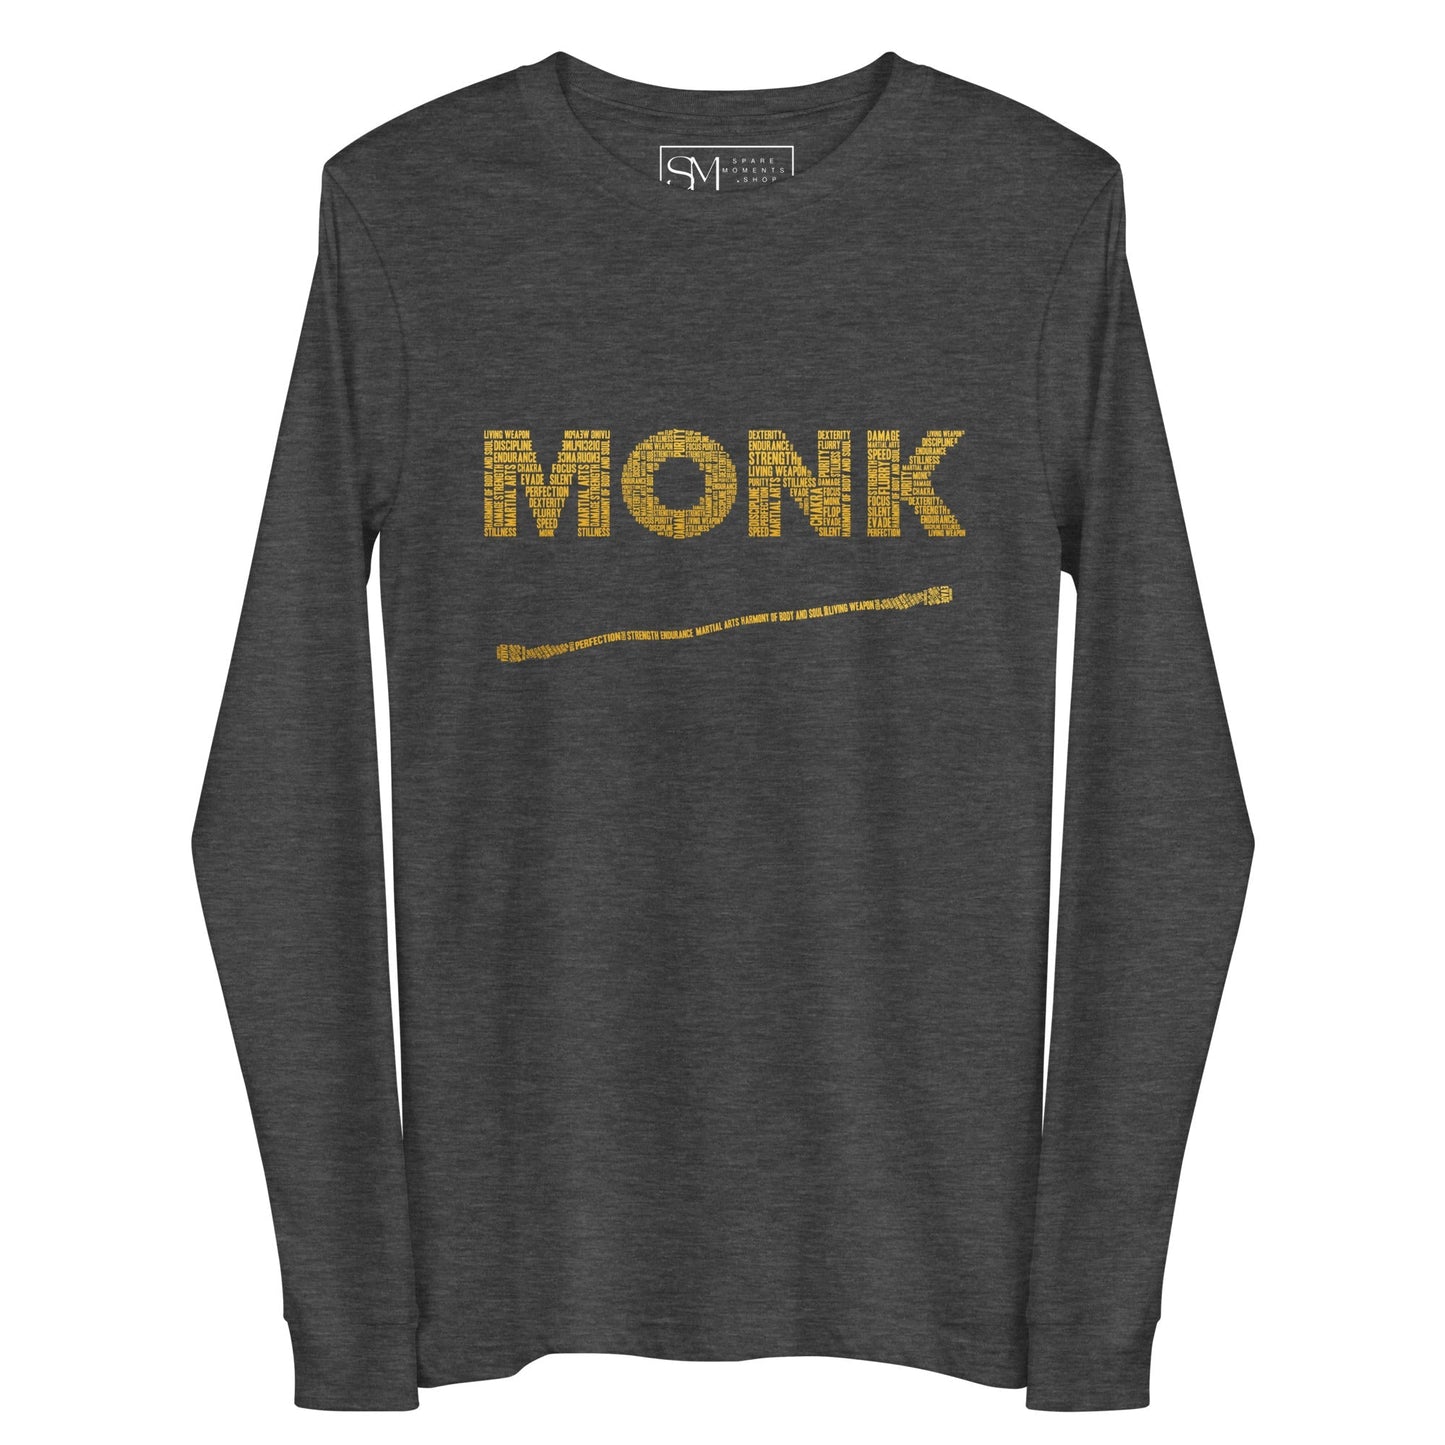 Monk DnD Long Sleeve Tee | Dungeons & Dragons Clothing